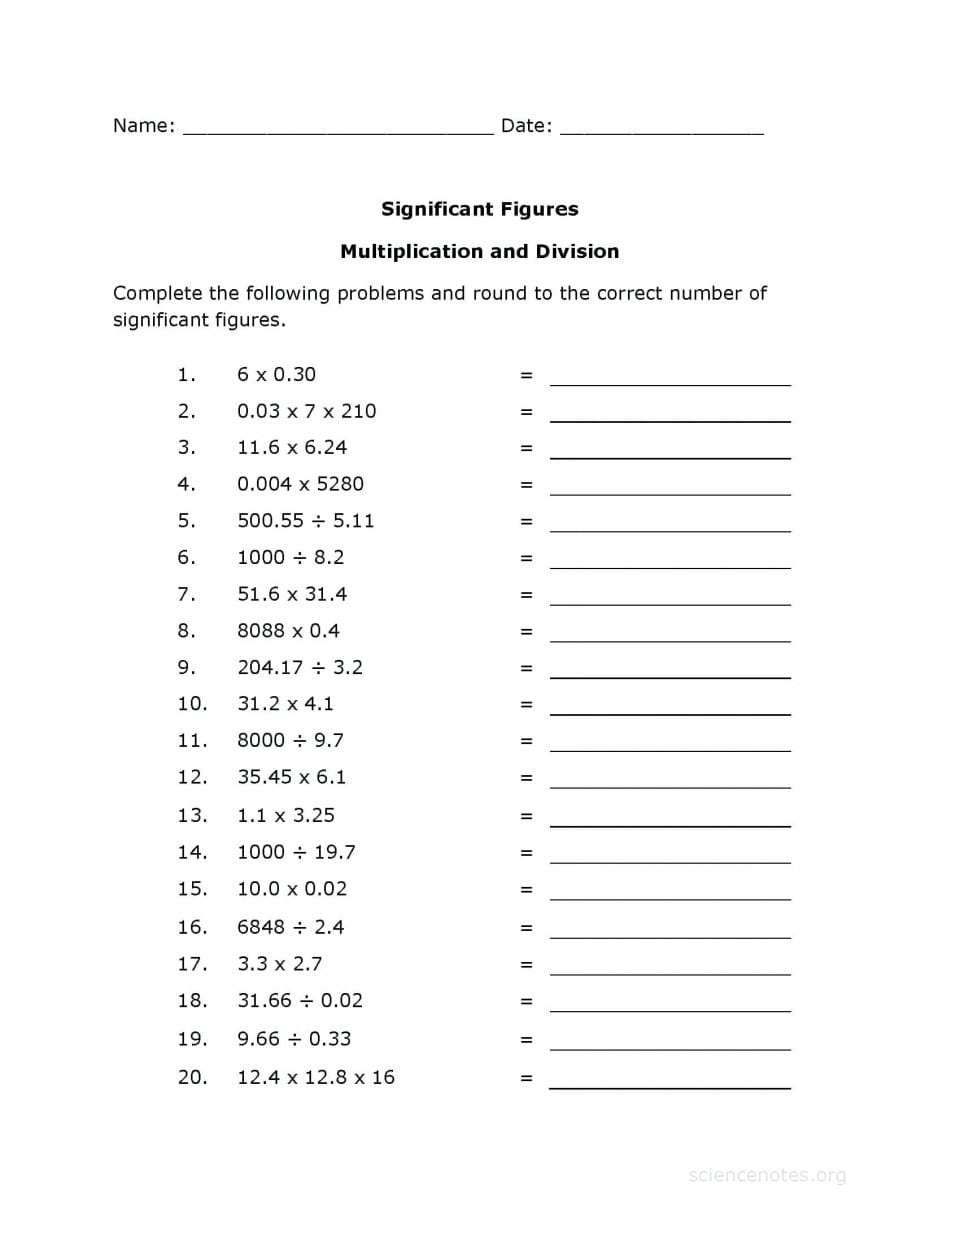 properties-of-addition-and-multiplication-worksheets-db-excel